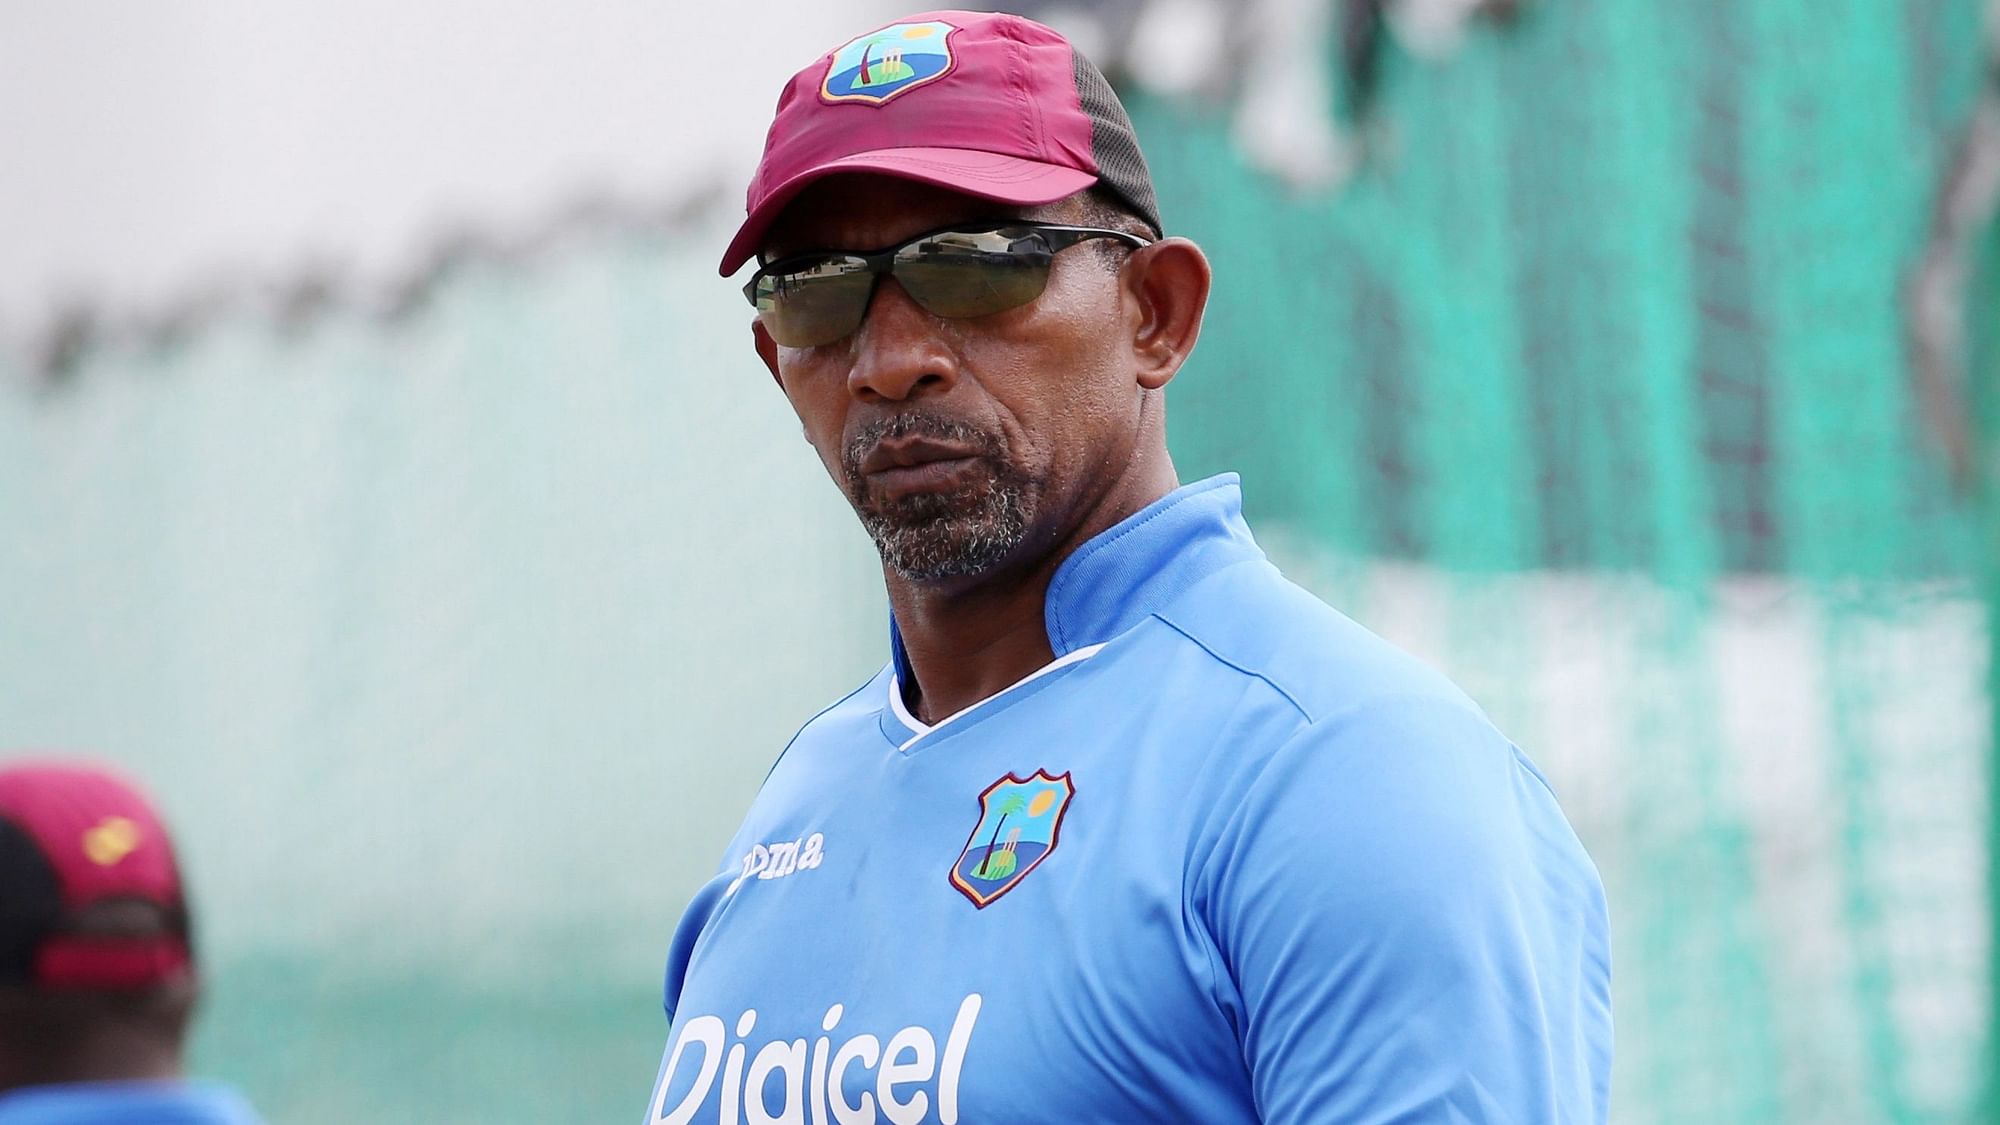 Former West Indies opener Phil Simmons pulled out of the race for the Indian cricket team chief coach’s job.